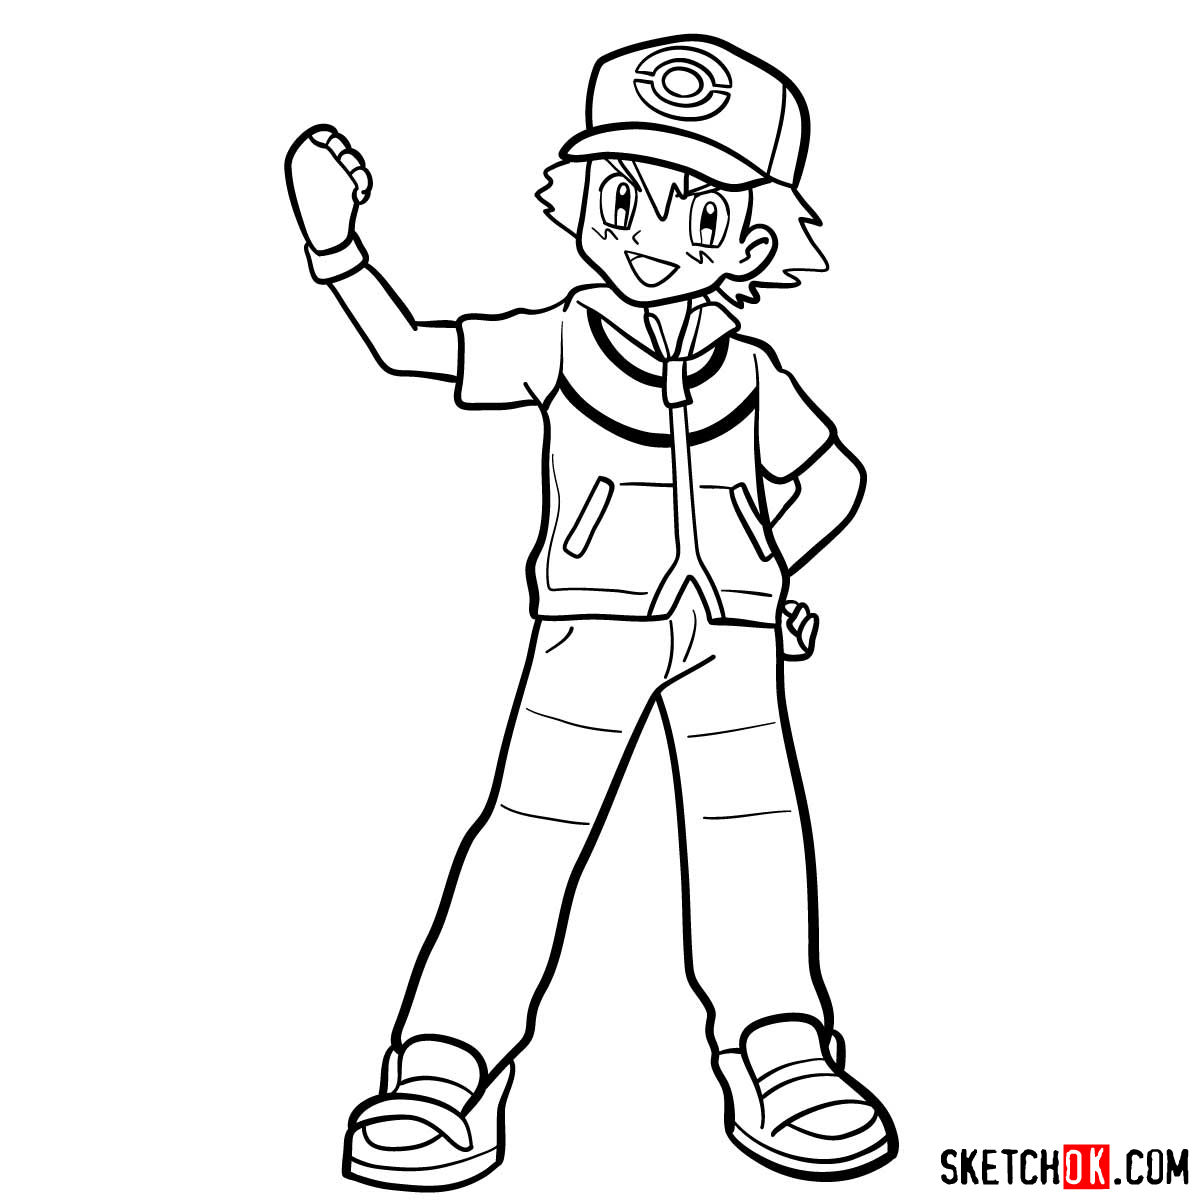 How to draw Ash from Pokemon anime - step 15